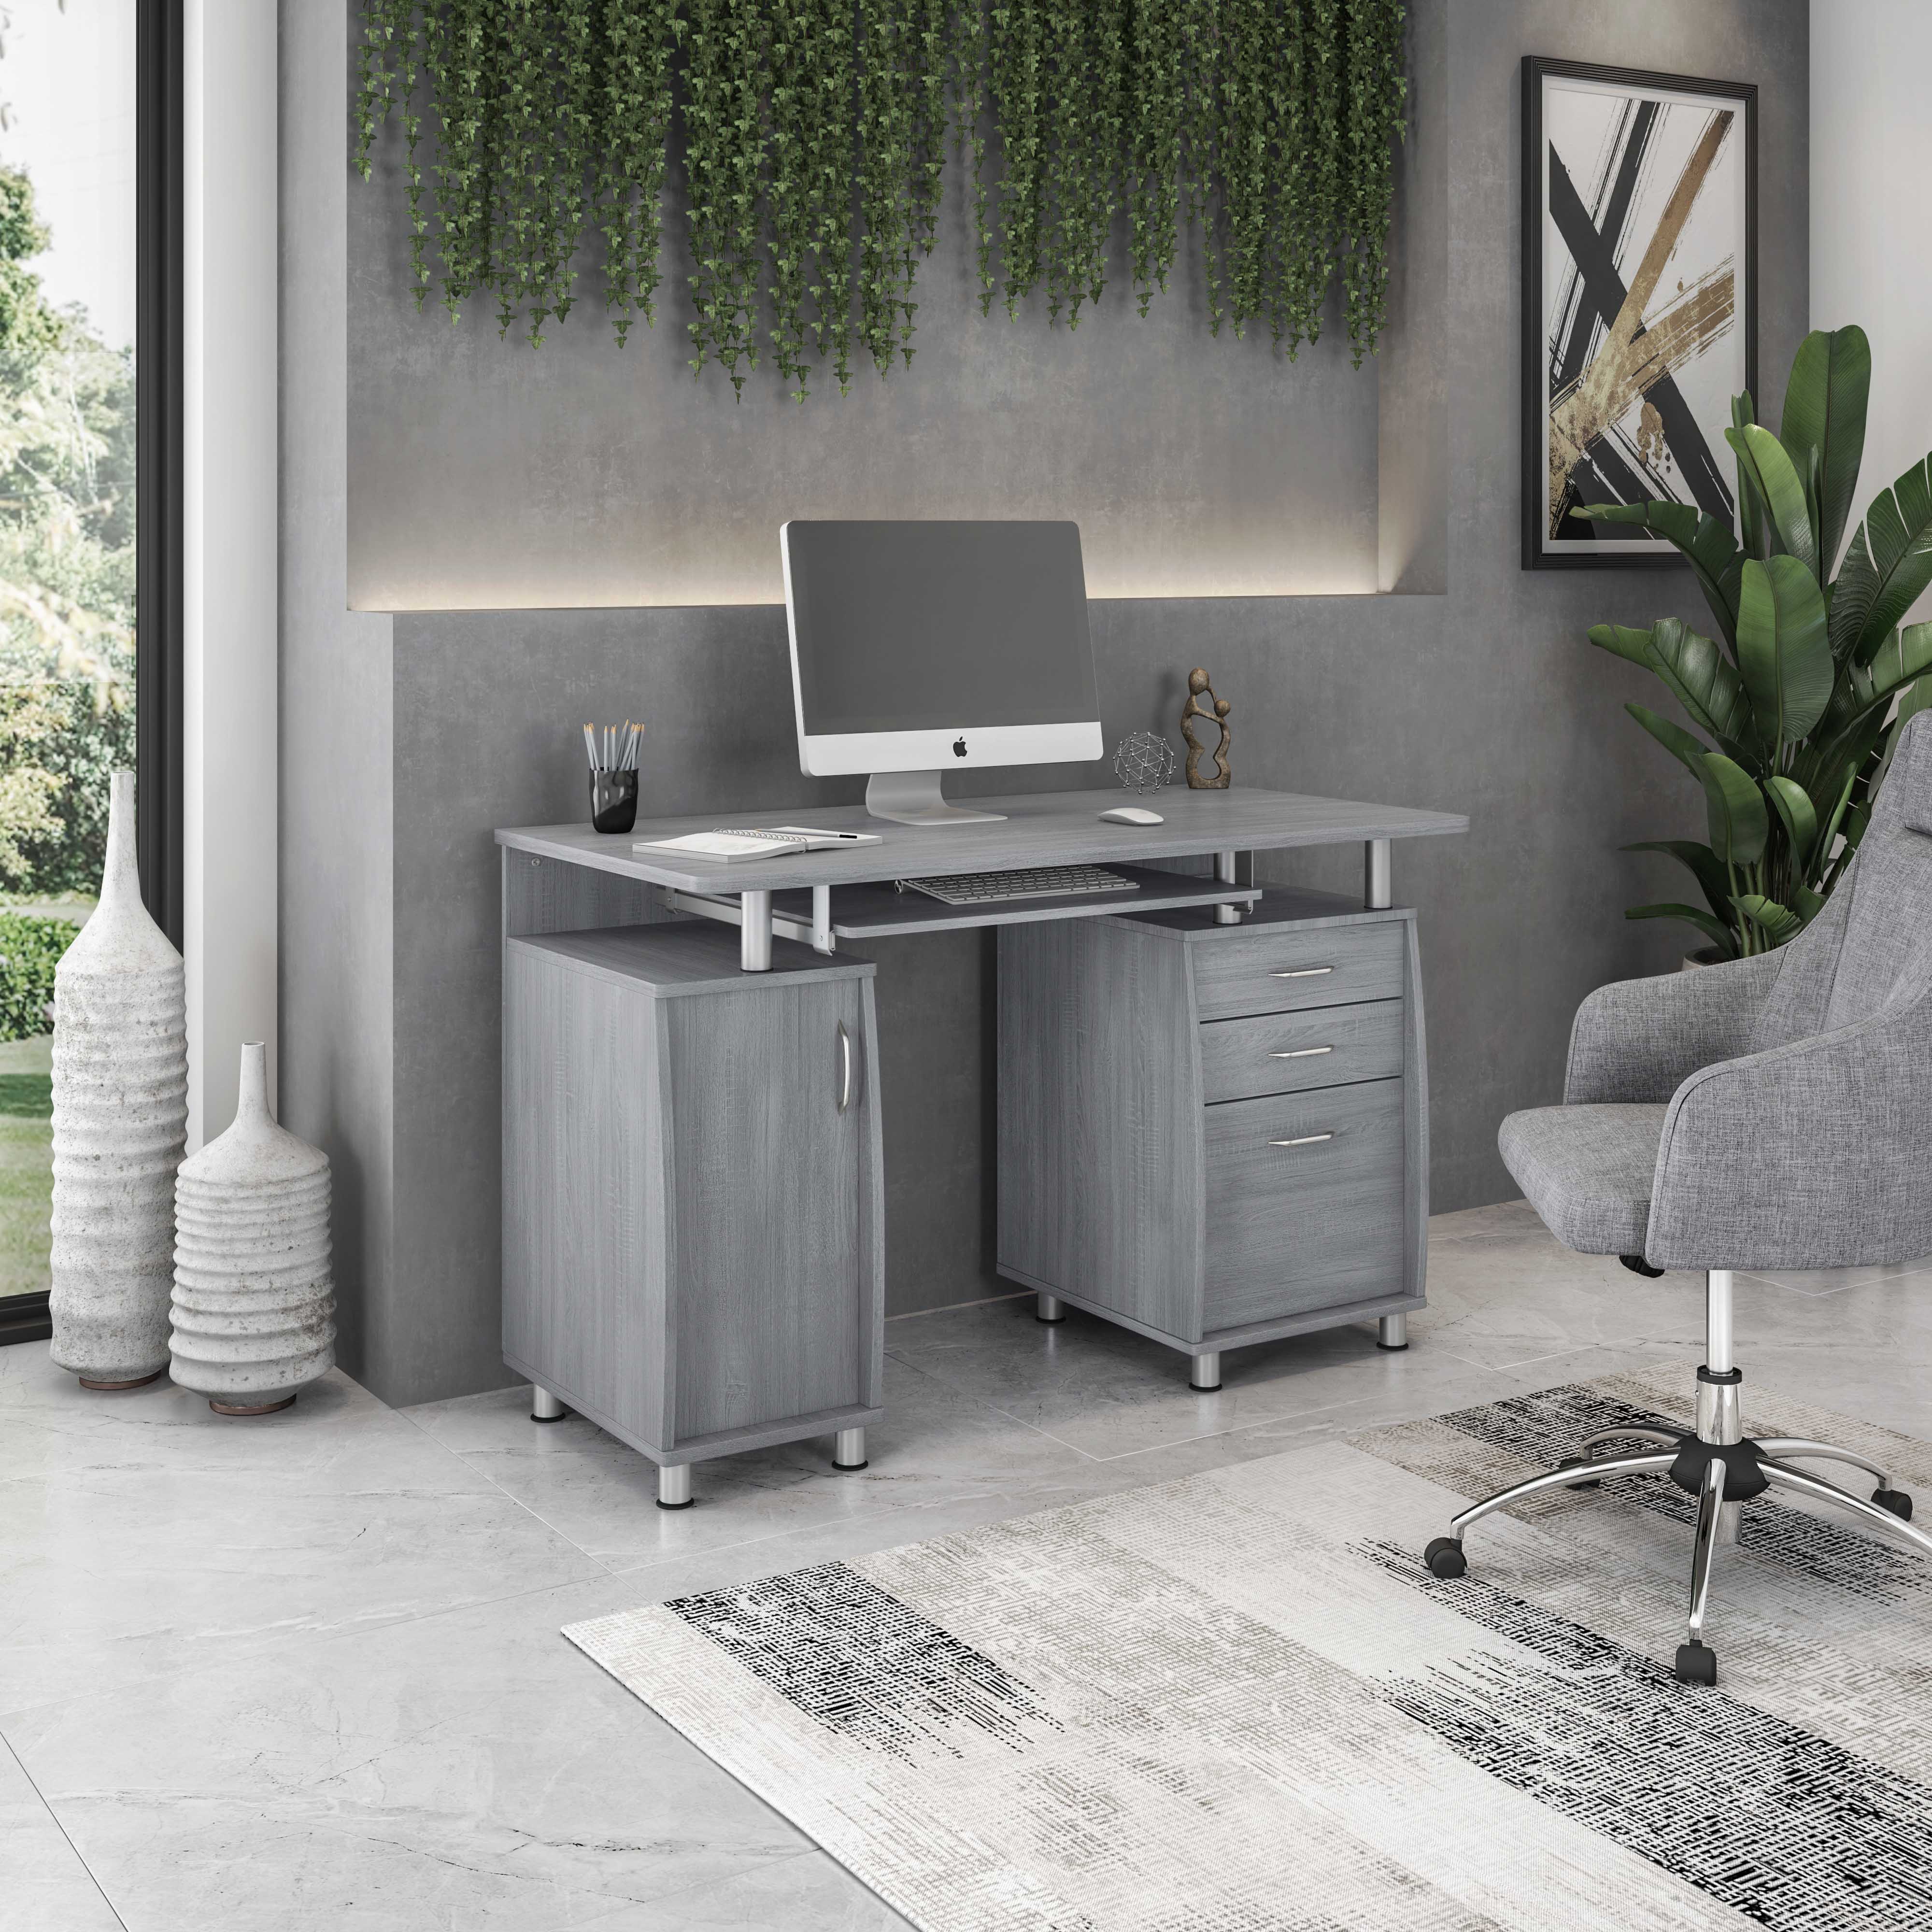 Techni Mobili Complete Adult Computer Workstation with Cabinet and Drawers, 30" H, Gray - image 1 of 11